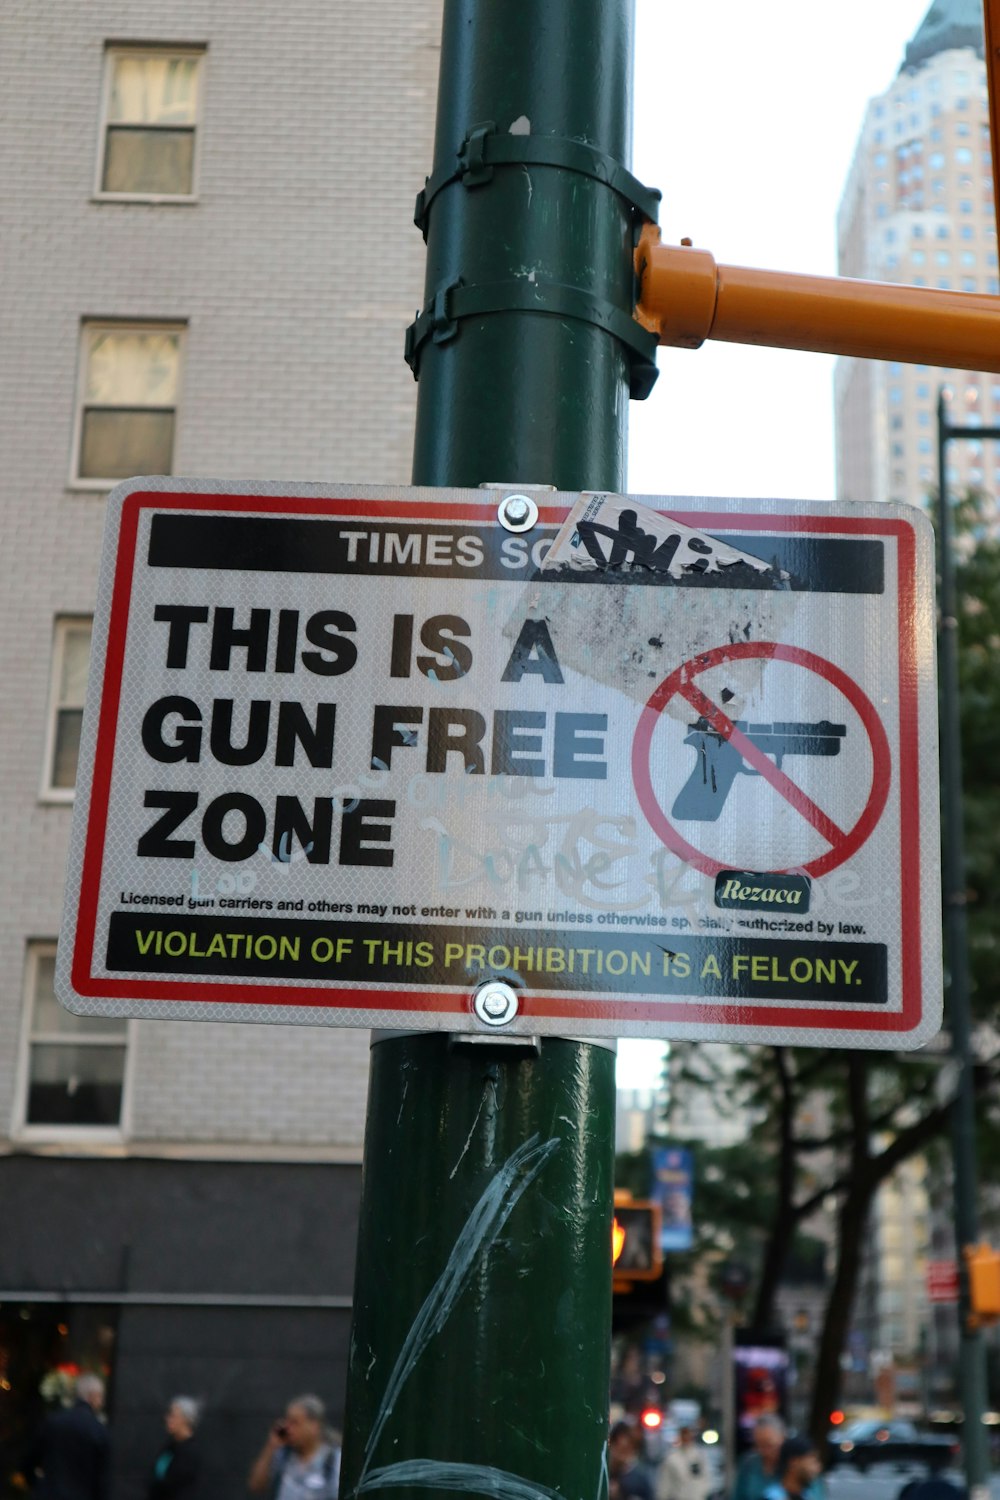 this is a gun free zone sign on a pole